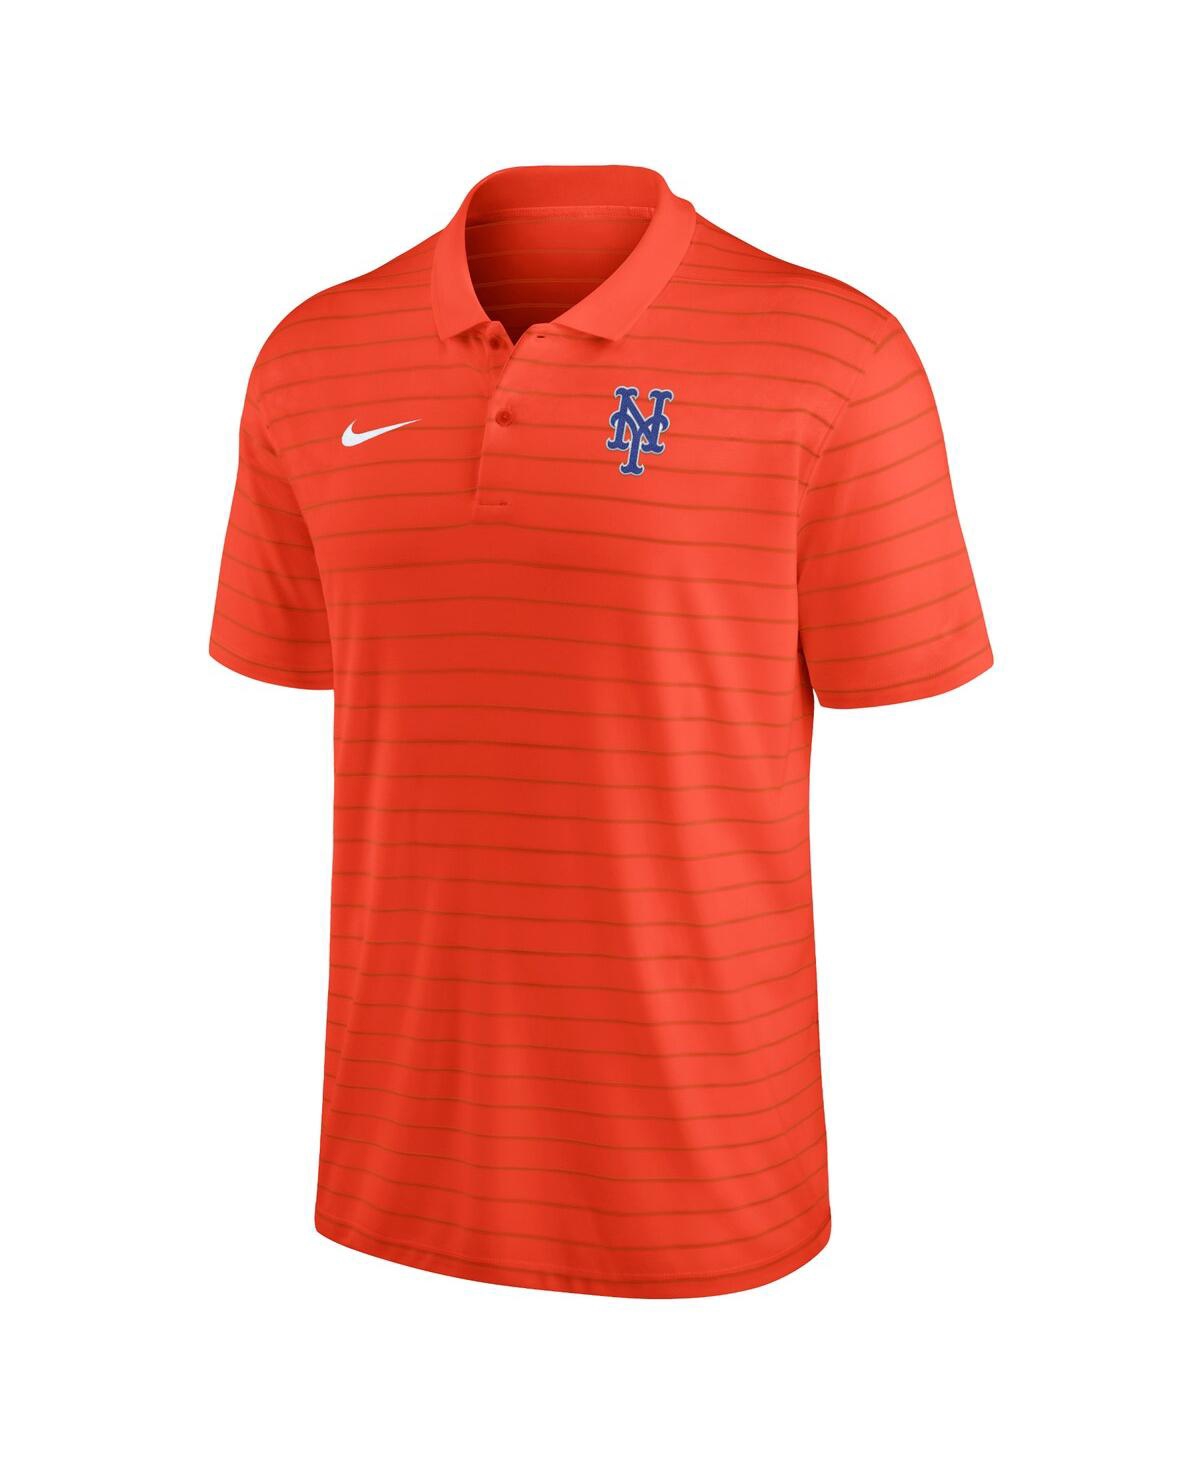 Shop Nike Men's Orange New York Mets Authentic Collection Victory Striped Performance Polo